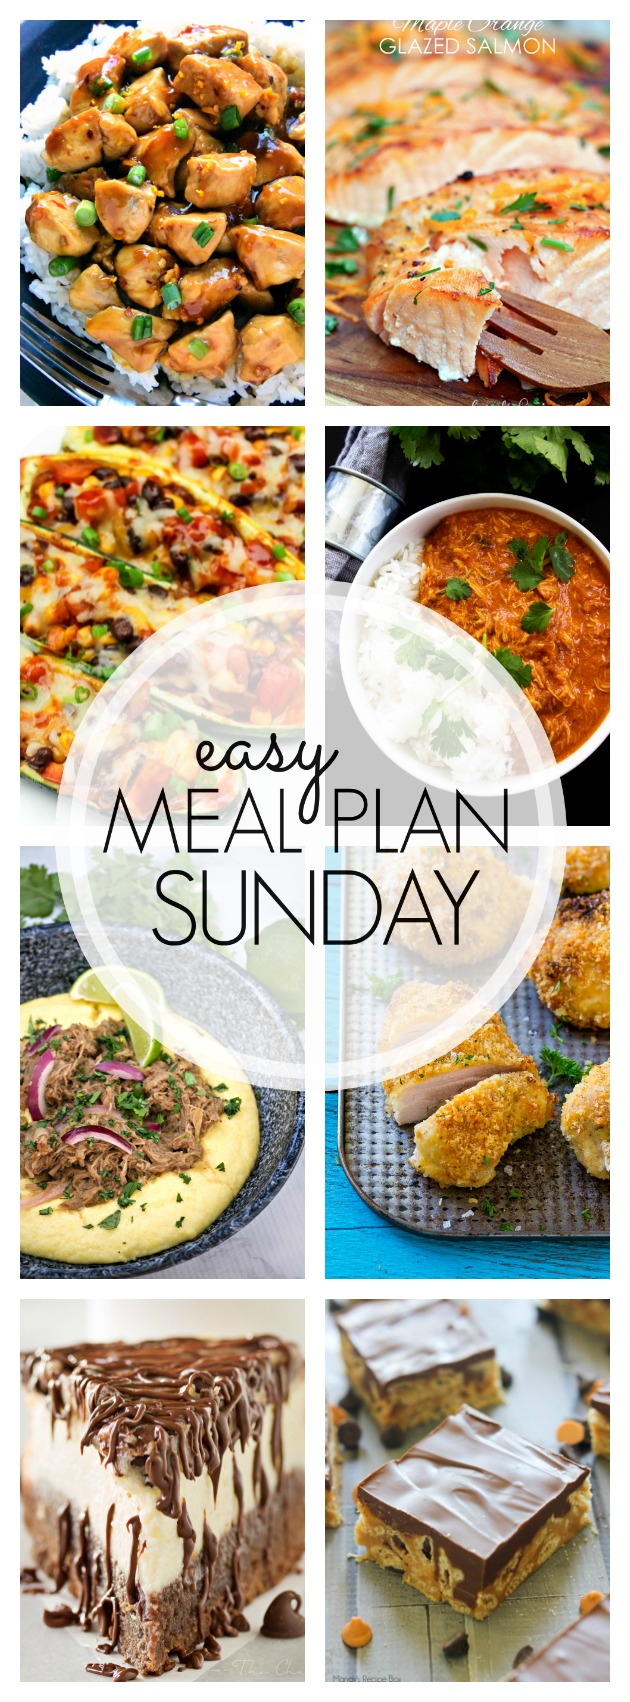 Easy Meal Plan Sunday #80